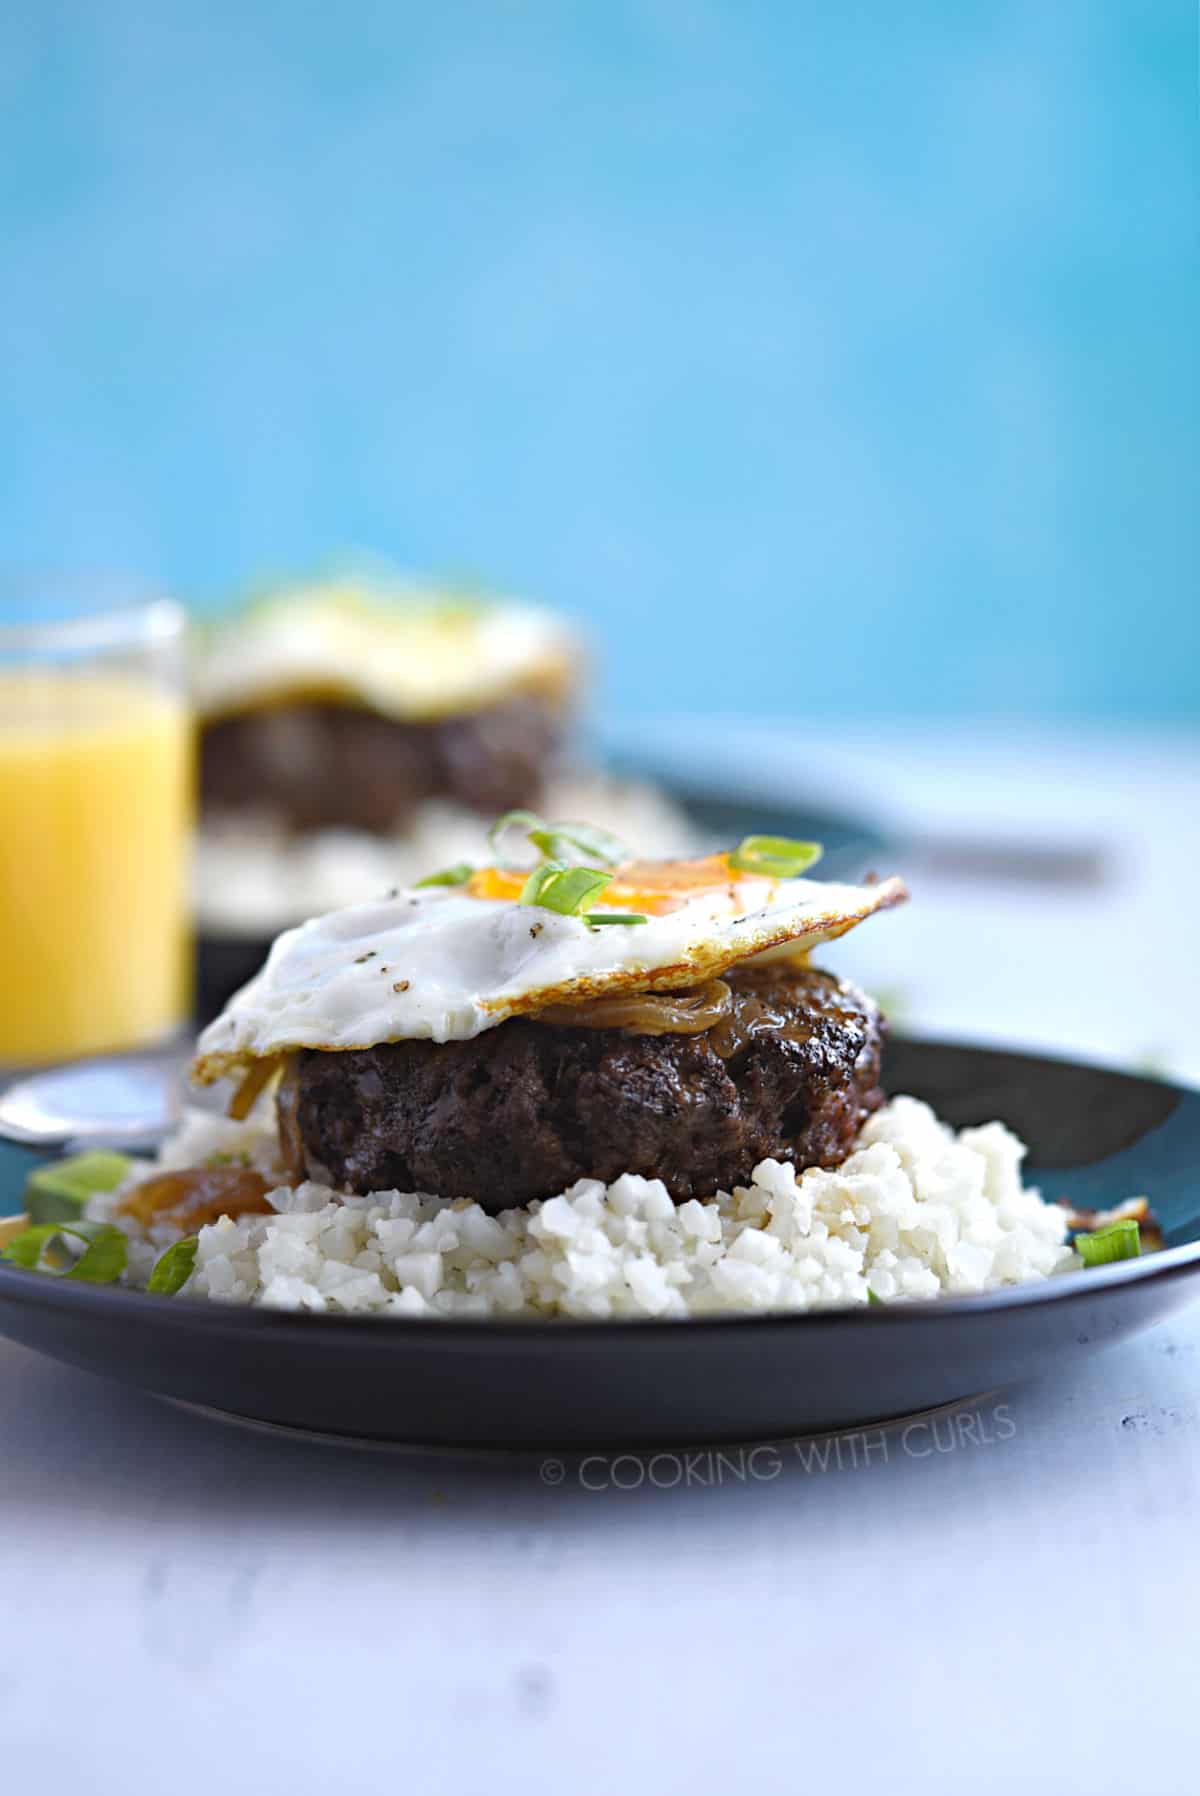 A ground hamburger steak patty topped with rich gravy and fried egg sits atop steamed rice and is garnished with green onions with a glass of orange juice and a second plate of food in the background.